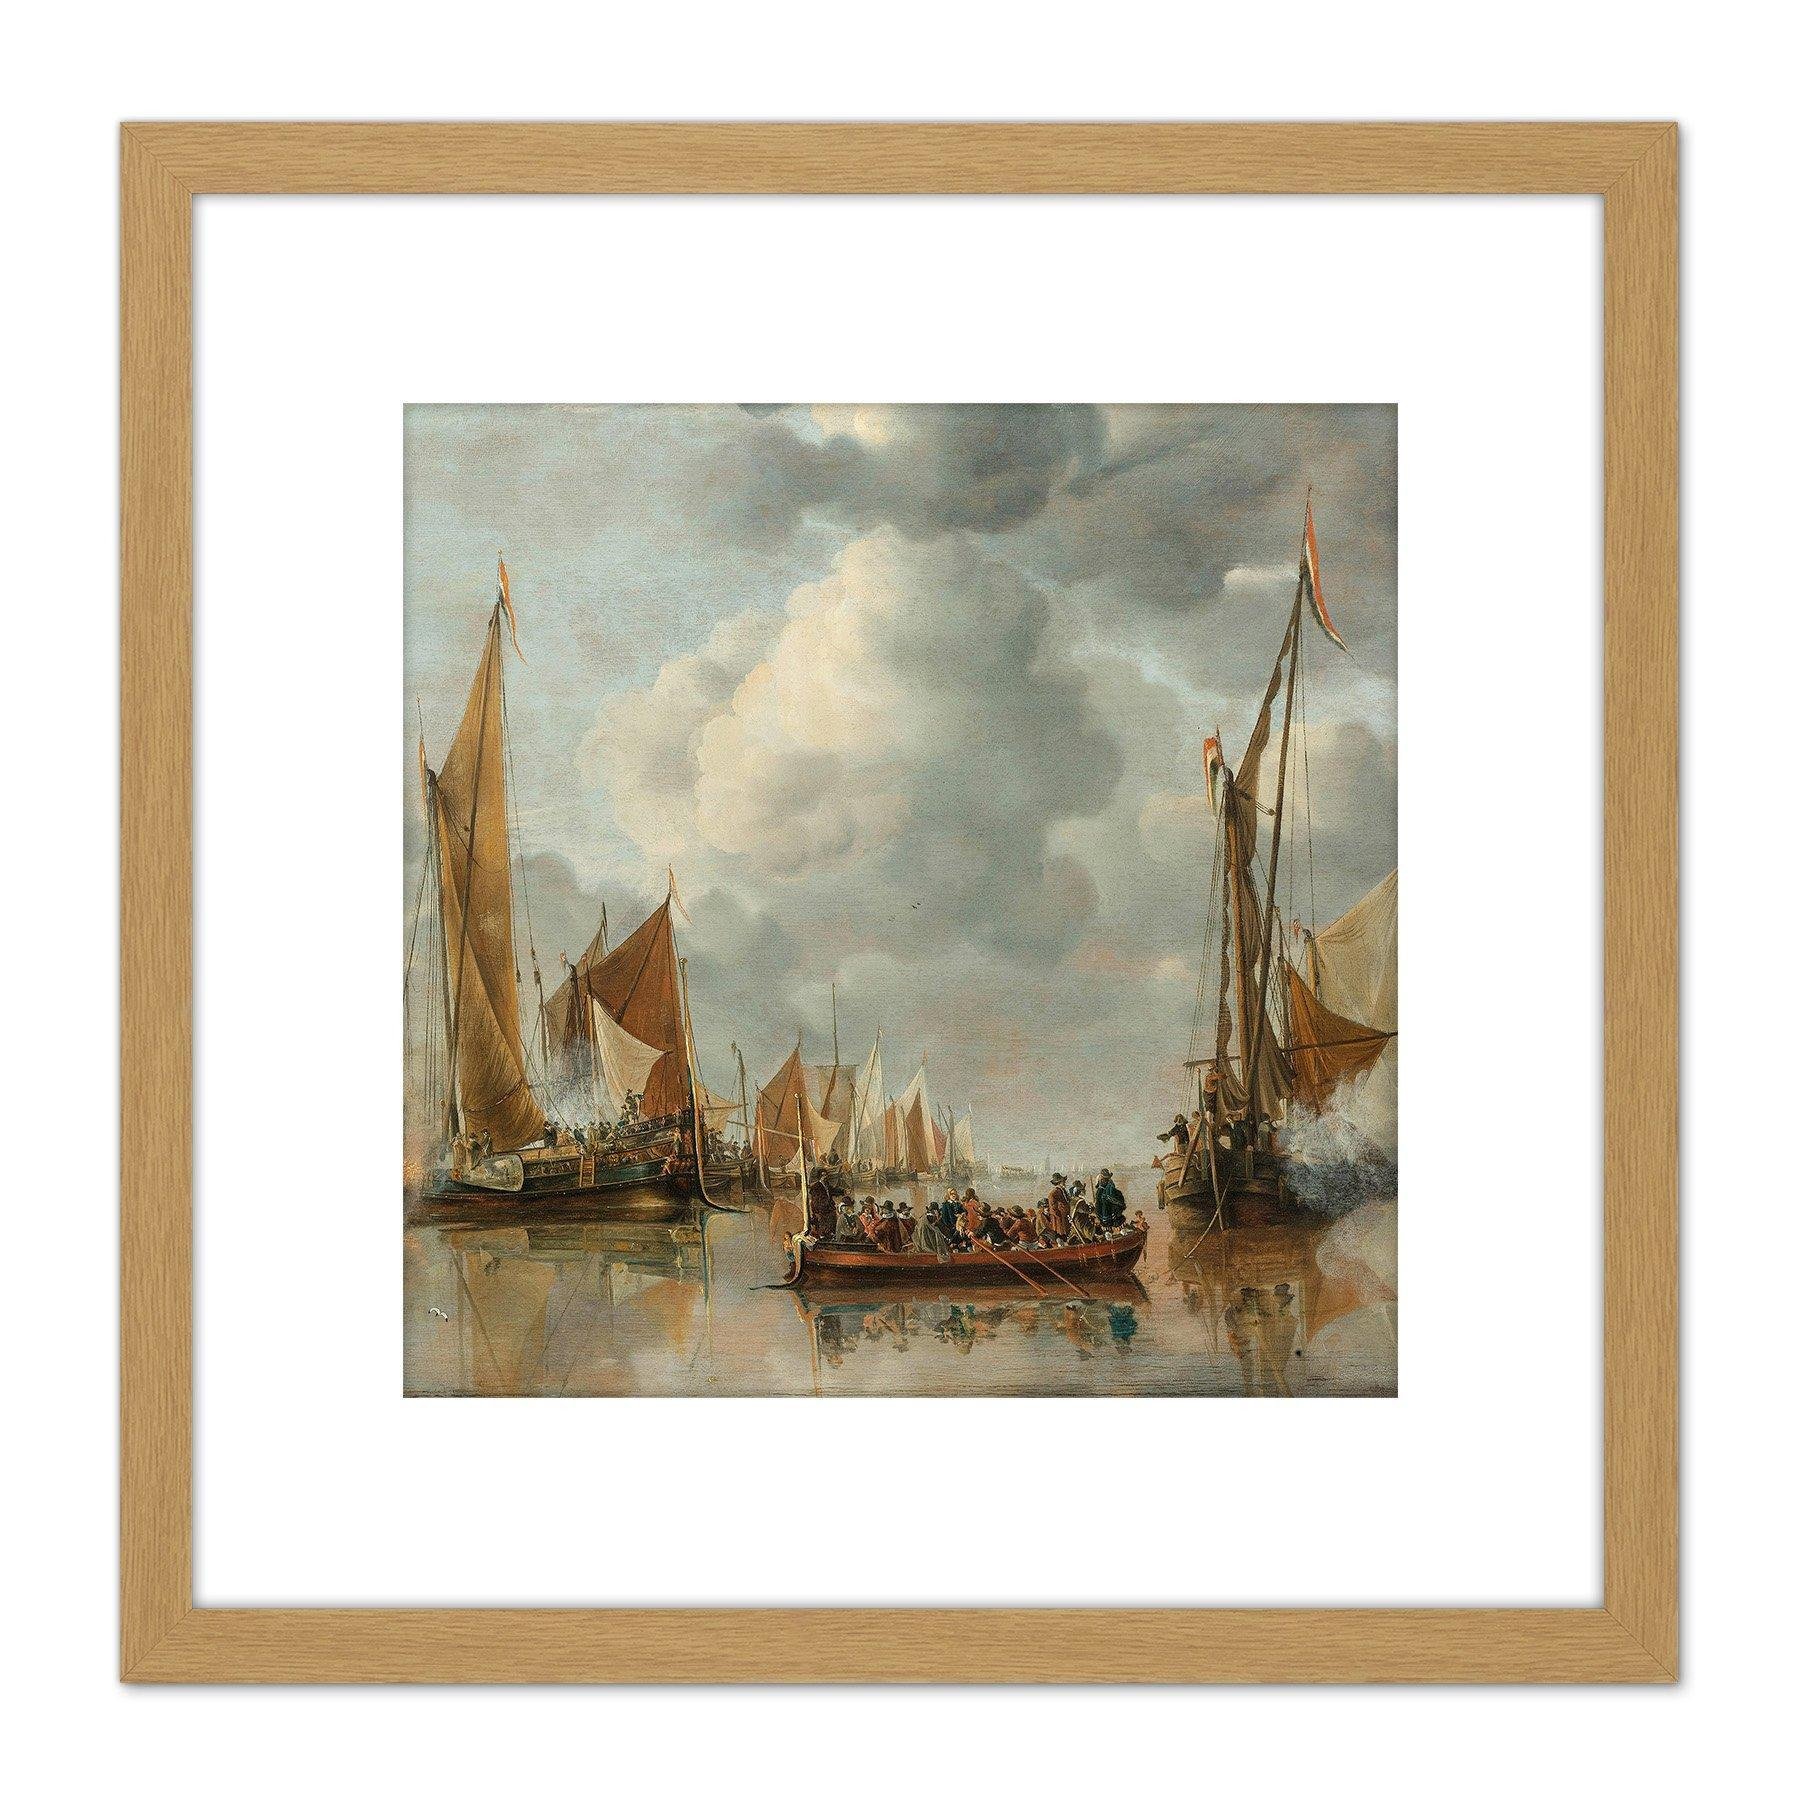 Van De Cappelle Fleet Saluting State Barge 8X8 Inch Square Wooden Framed Wall Art Print Picture with Mount - image 1